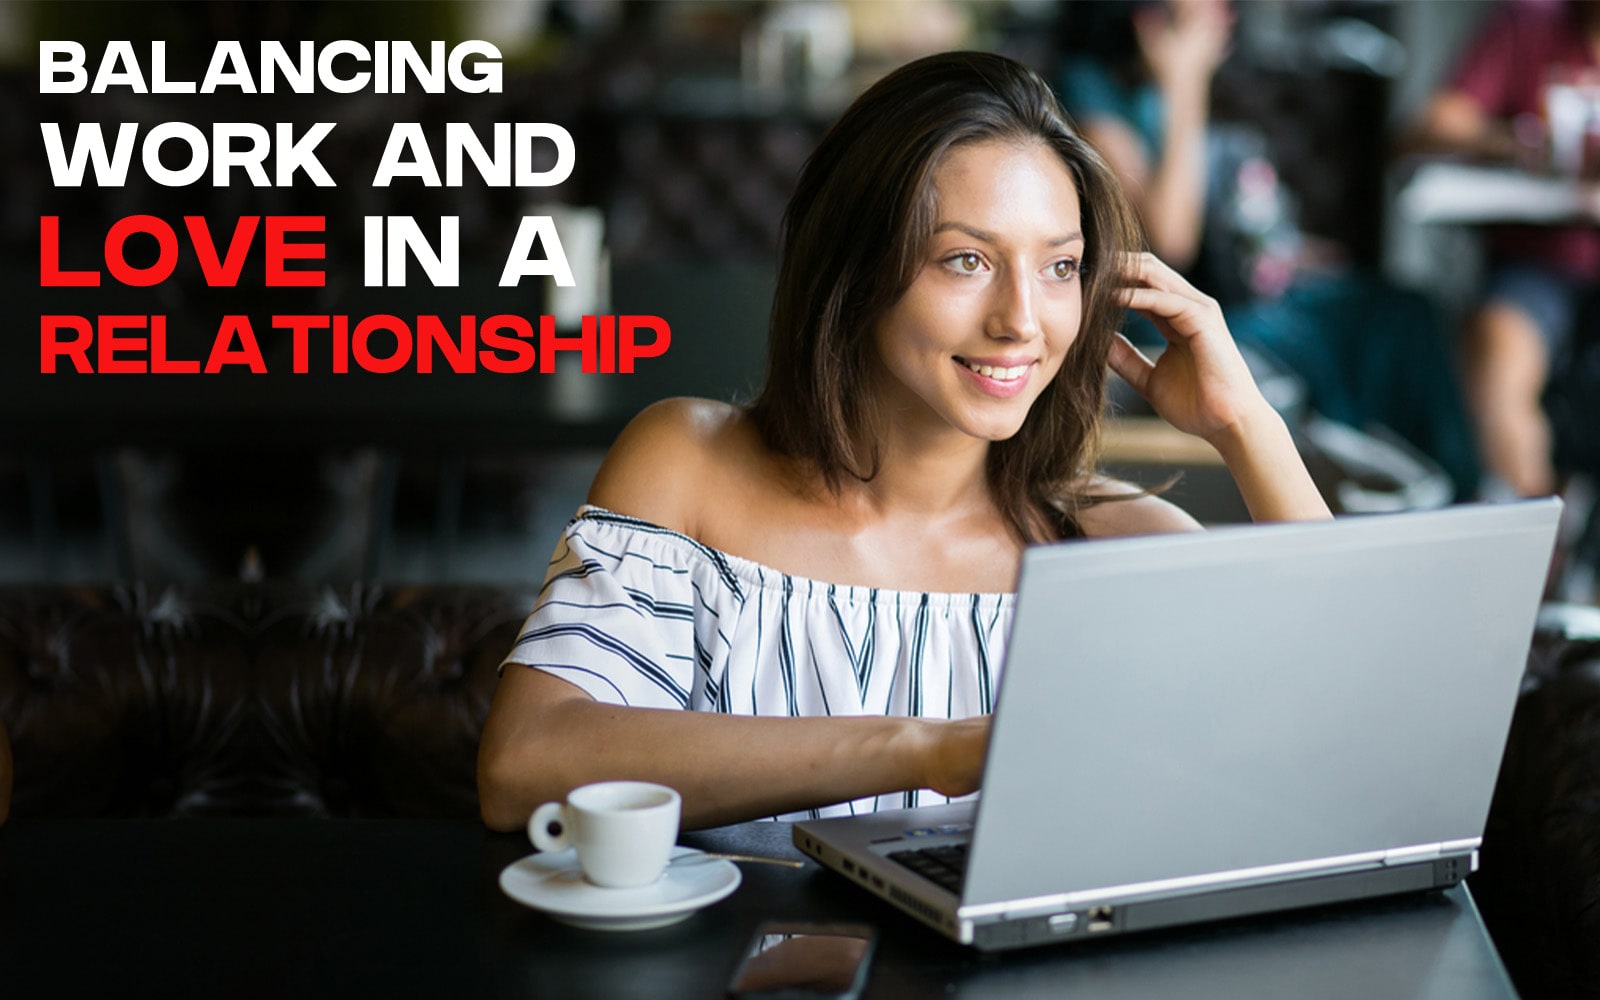 Balancing Work and Love in a Relationship